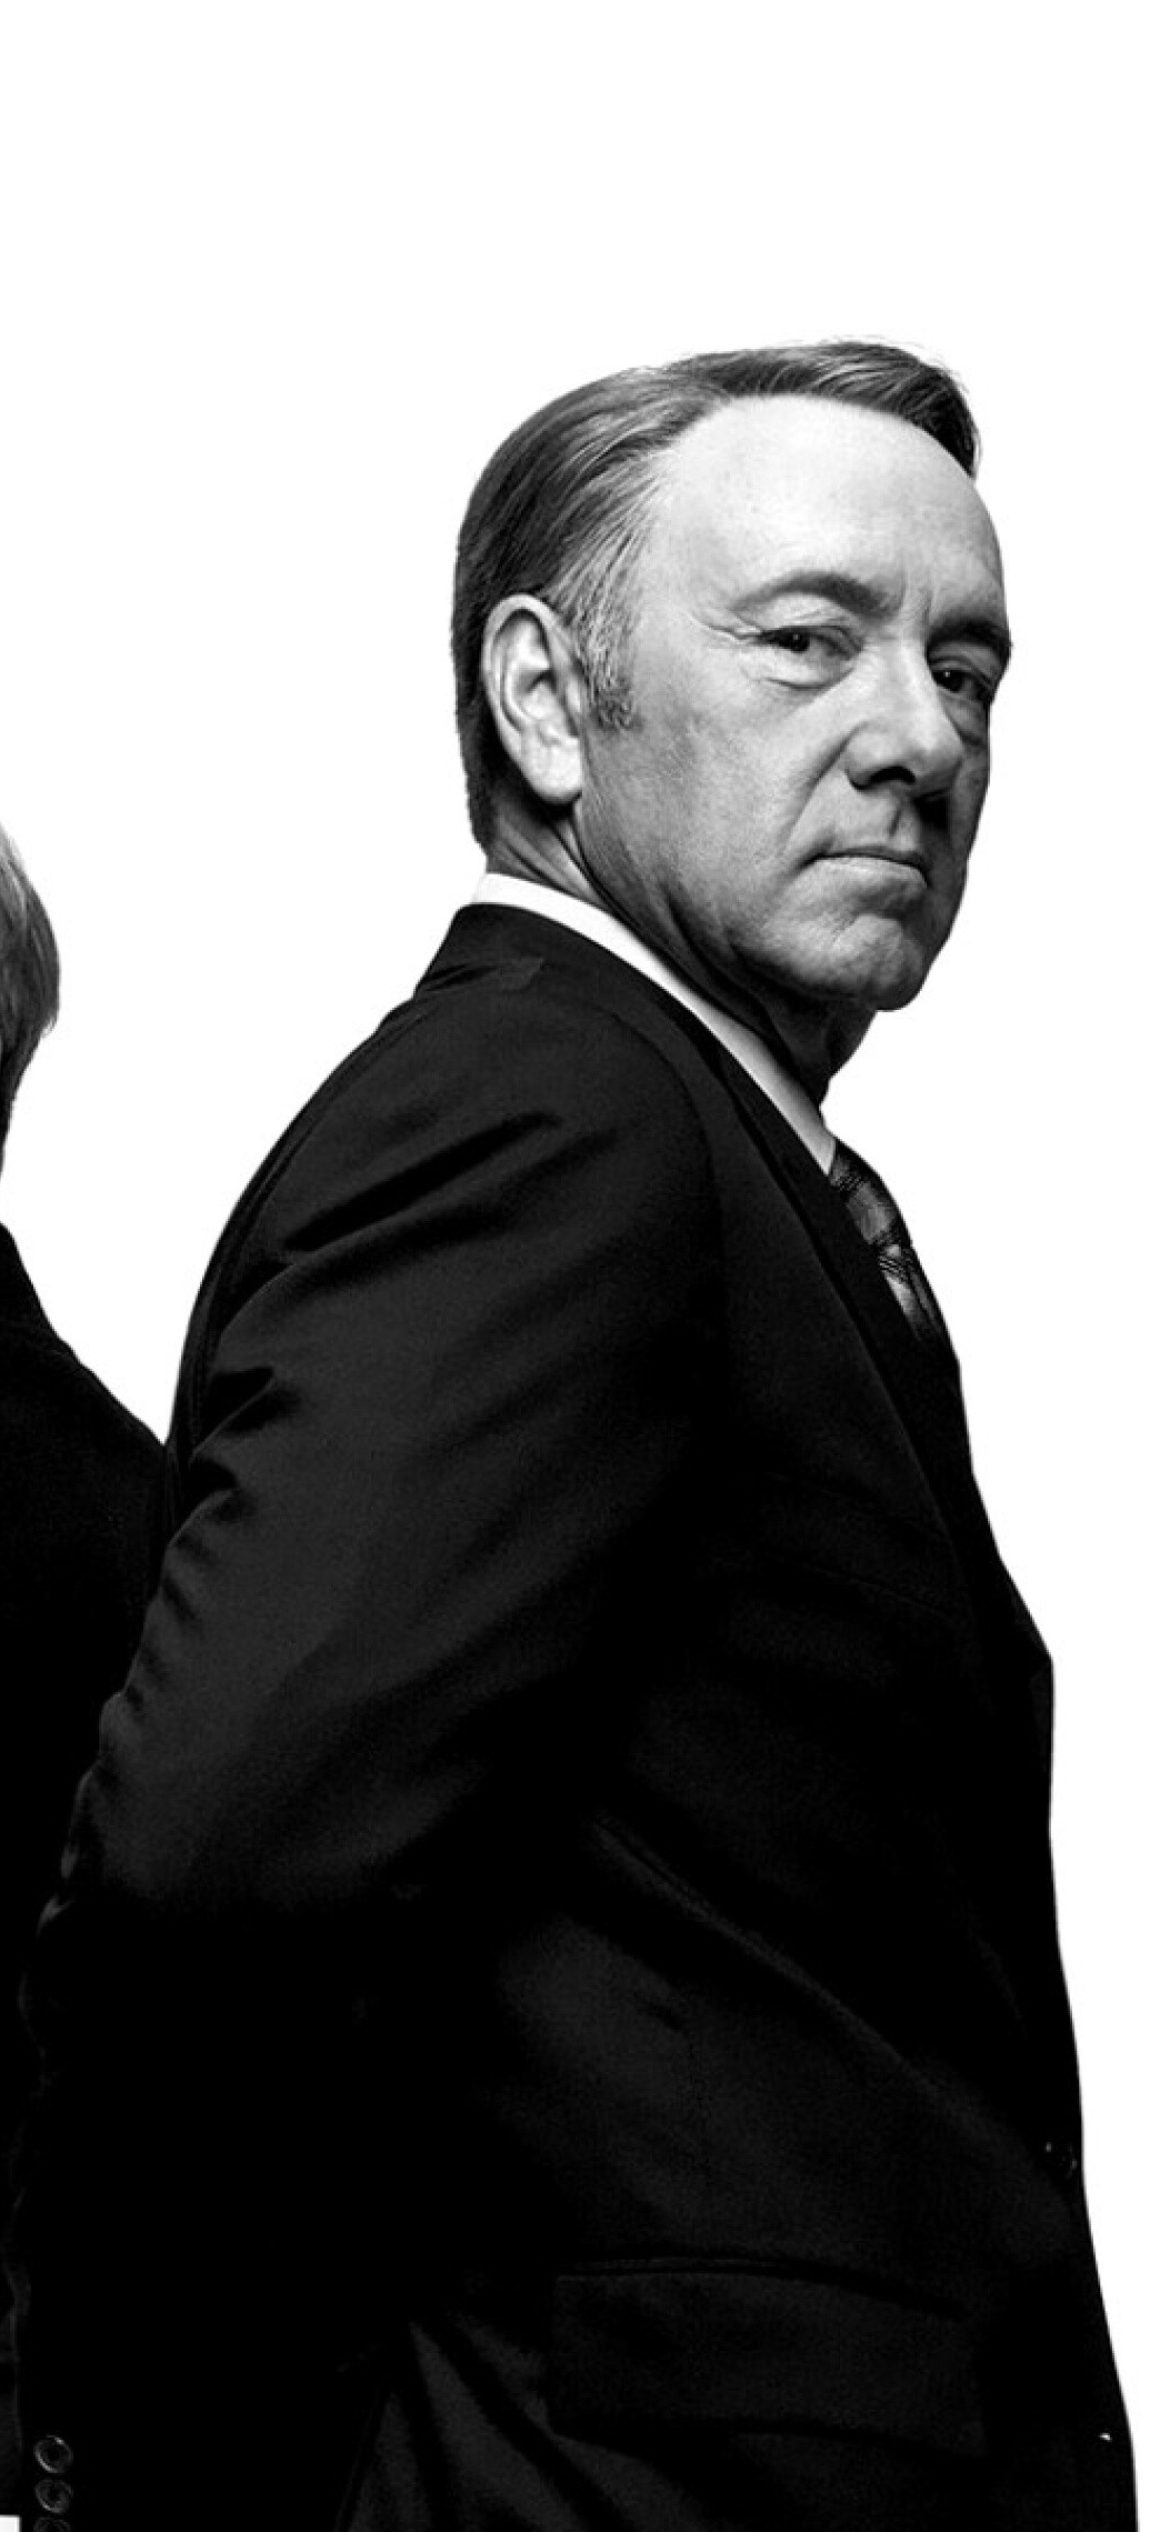 House of Cards: Kevin Spacey as Frank Underwood, the First Gentleman of the United States in season five. 1170x2540 HD Wallpaper.